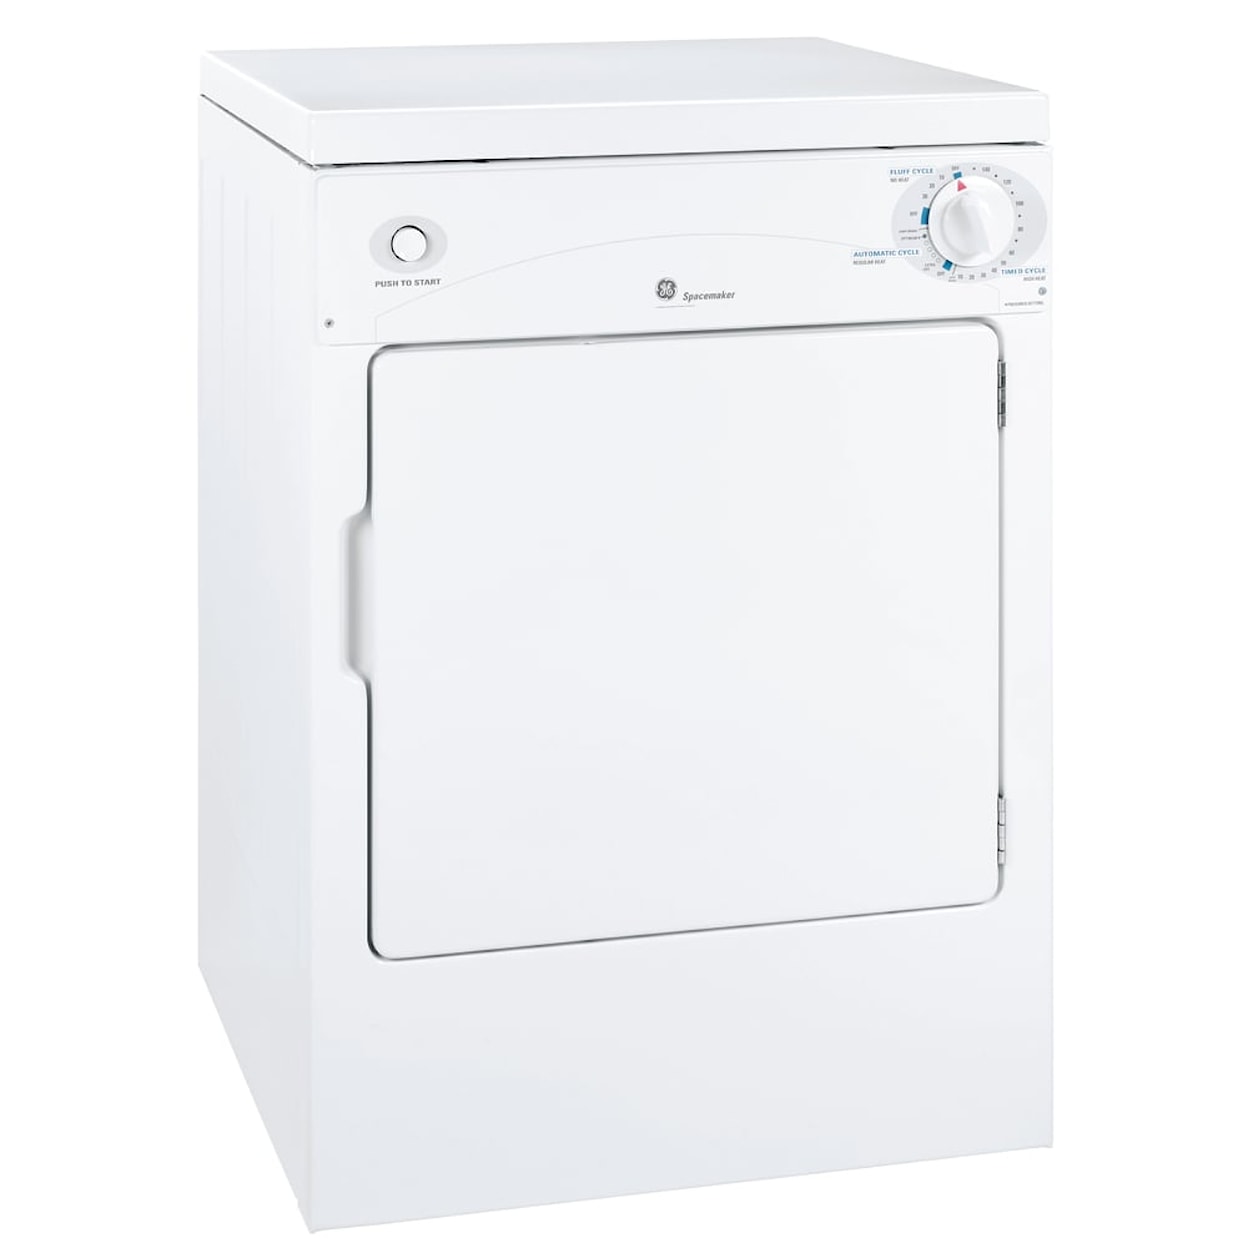 GE Appliances Washer/Dryer Combo Electric Compact Dryer